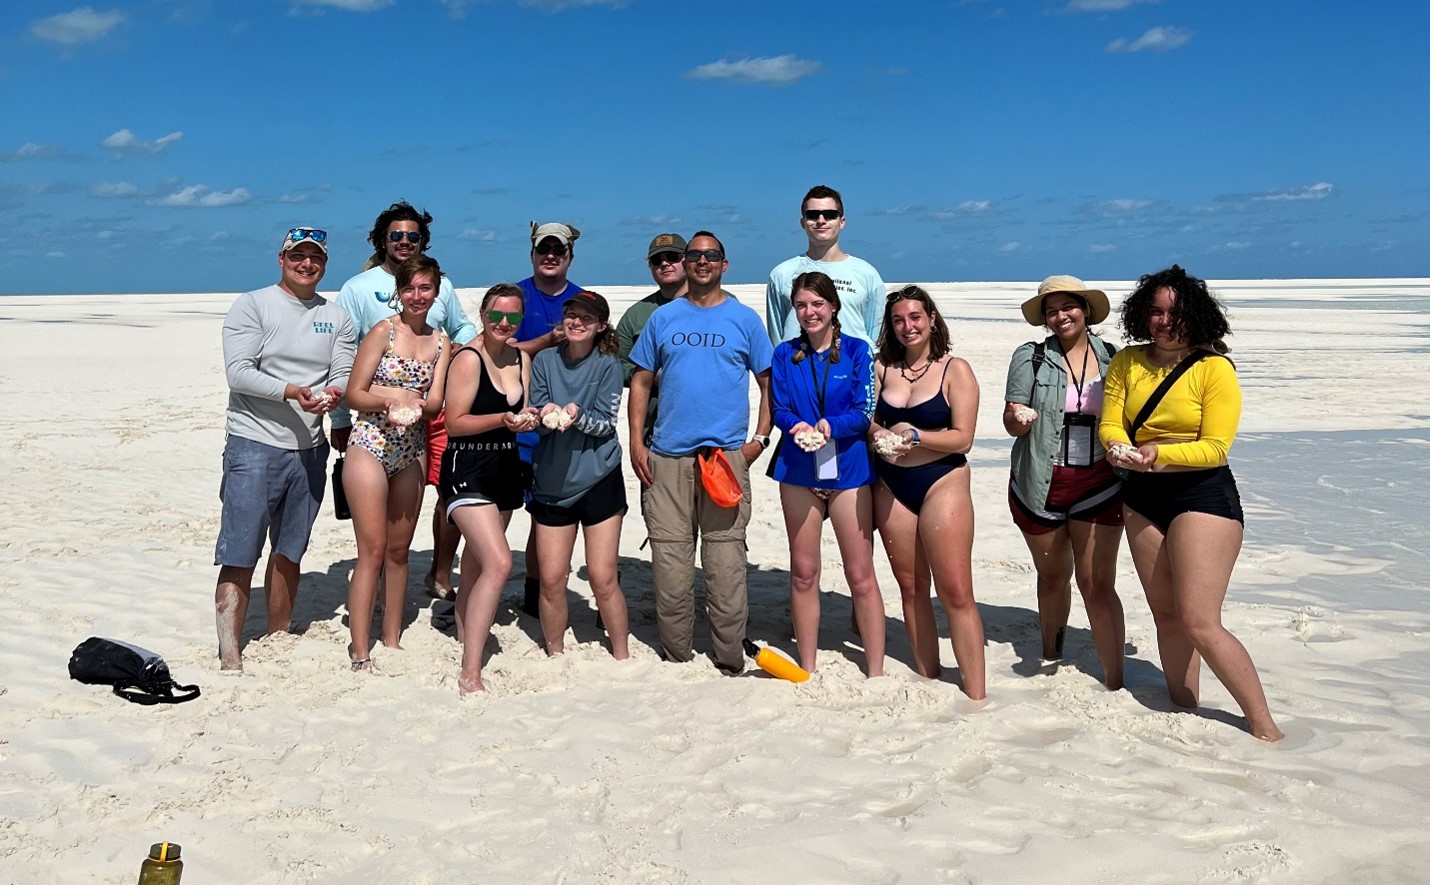 Examining ooilitic sand on the shoals of the Joulter Cays. From left to right: Dr. Cameron Manche,  Sam Queiroga, Milly Hencey,  Cameron Smolik, Elizabeth Mann, Danika Martin, Dr. Juan Carlos Laya, West Anderson, Lauren Telford, Dennis Zakowicz, Morgan Crowley, Barbara Reyes, and Bronte Heerdink.